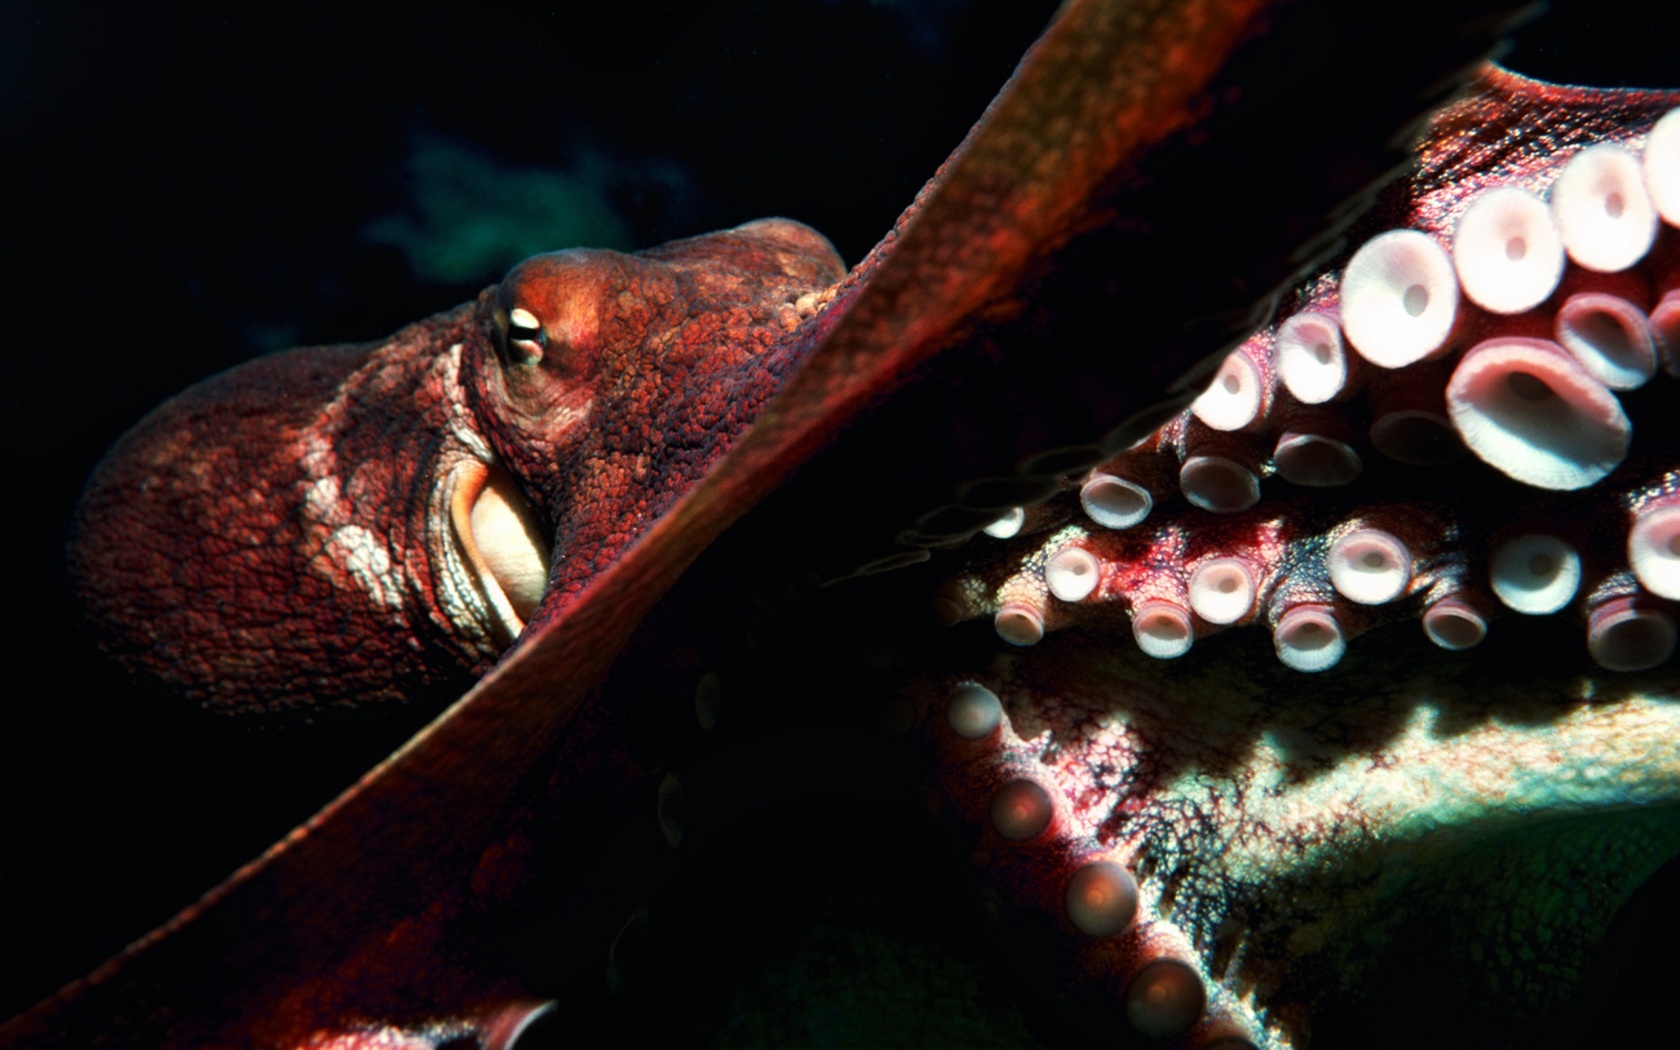 Top Rated Hqfx Octopus Image Nice Collection